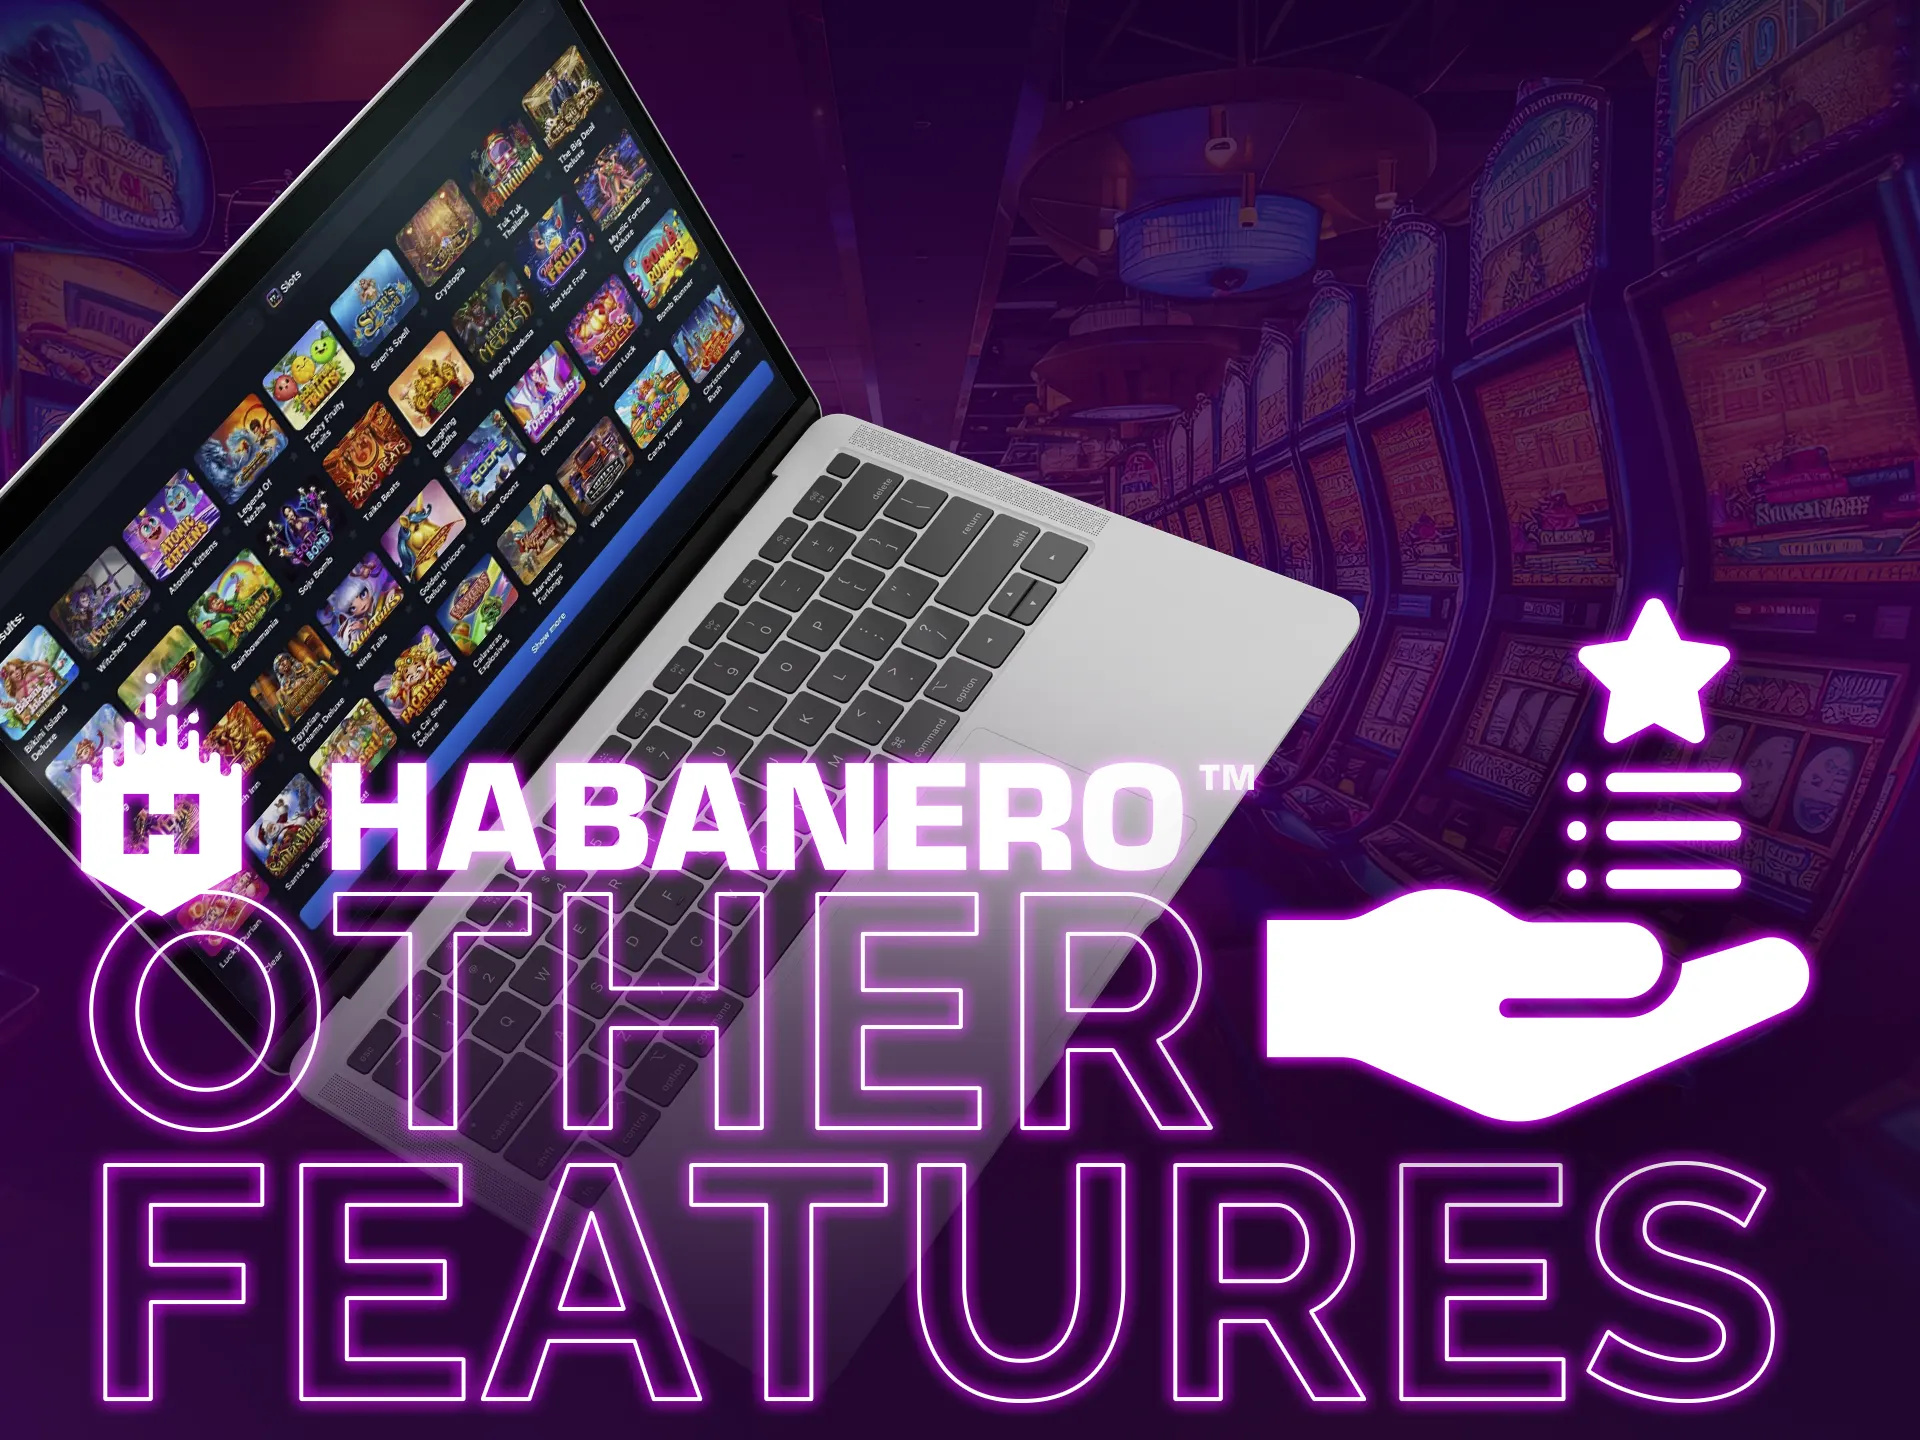 Habanero enhances gameplay with exciting features.